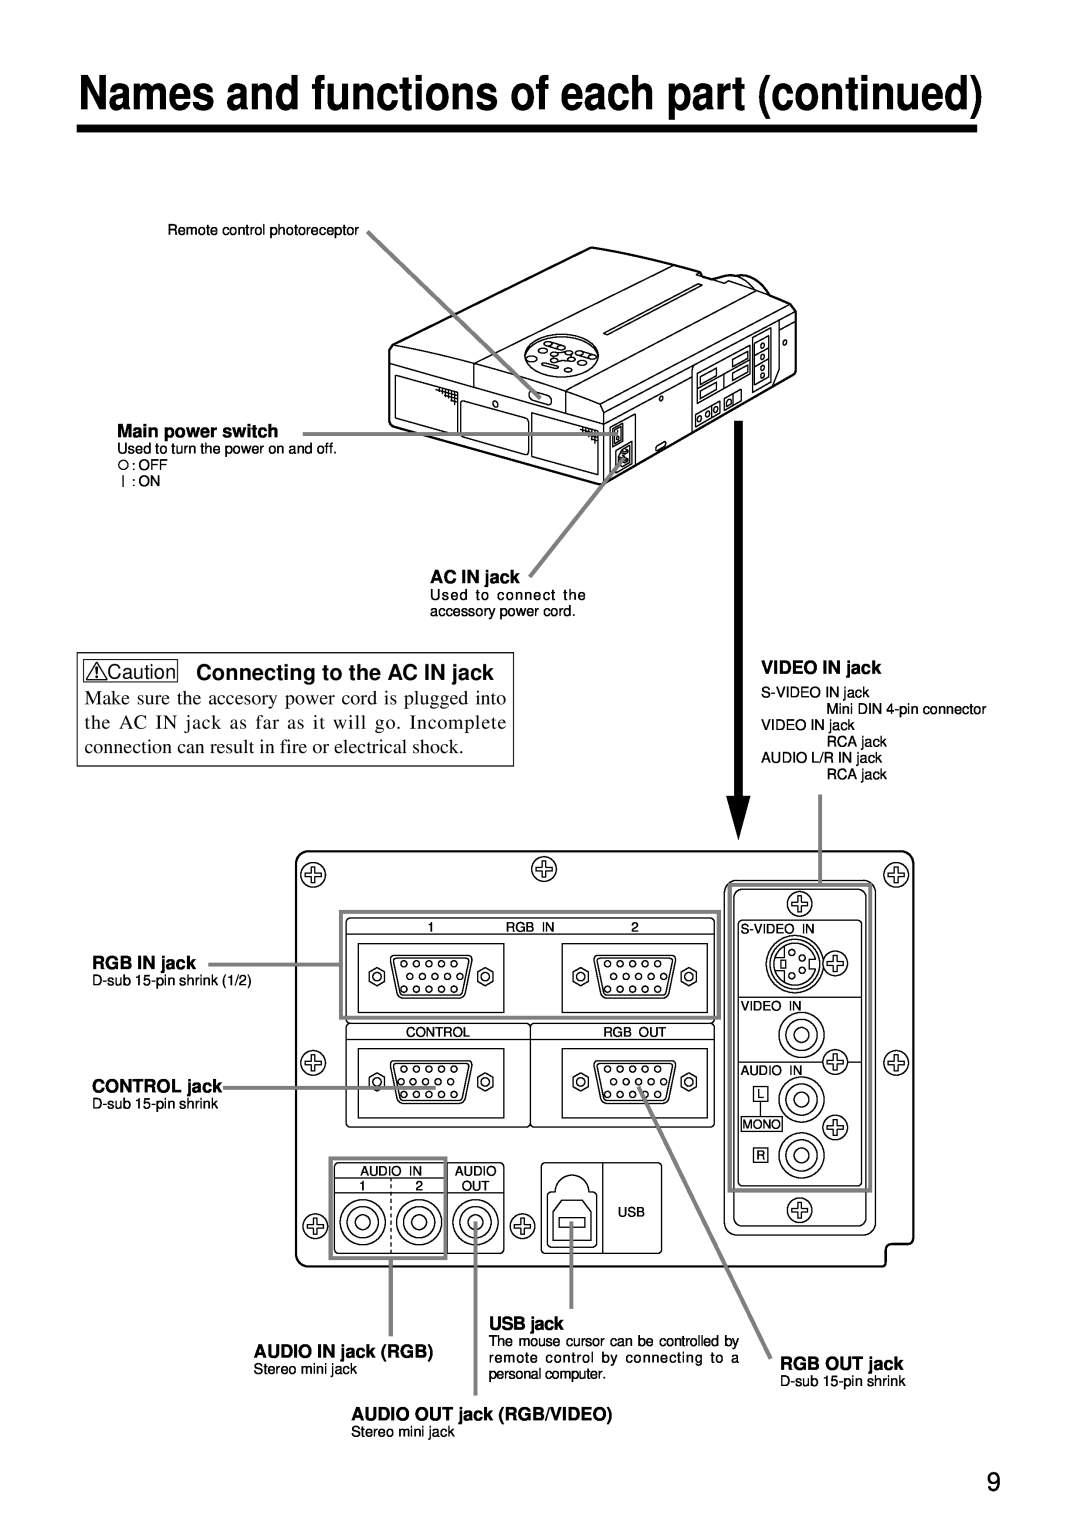 Hitachi CP-S860W user manual Names and functions of each part continued, Caution Connecting to the AC IN jack 